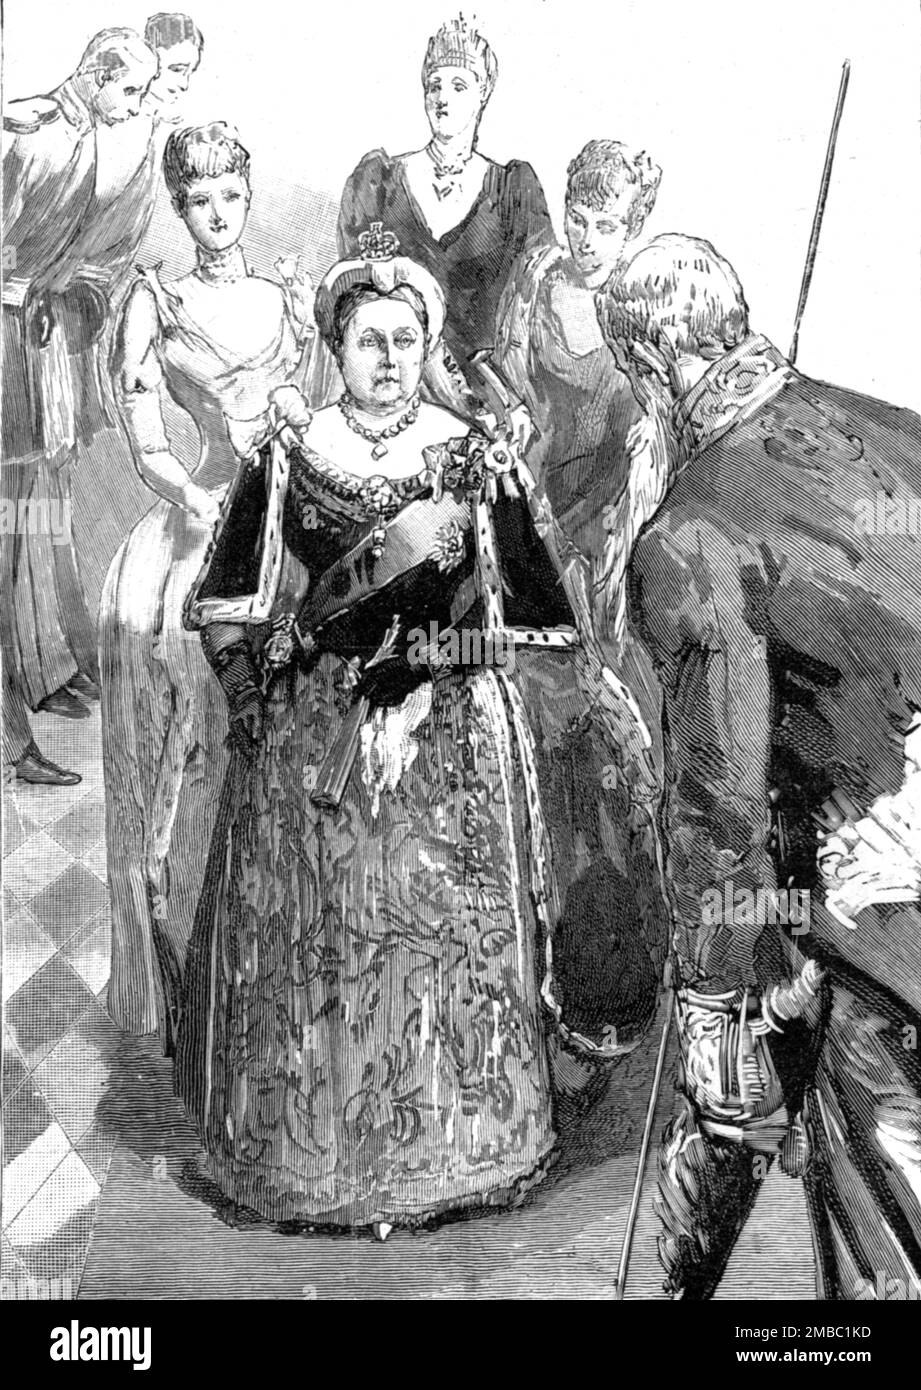 ''The Wedding of HRH Princess Louise of Schleswig-Holstein and HH Prince Aribert of Anhalt at St. Georges Chapel, Windsor, on July 6, 1891; The arrival of HM The Queen in St. Georges Chapel', 1891. From &quot;The Graphic. An Illustrated Weekly Newspaper&quot;, Volume 44. July to December, 1891. Stock Photo